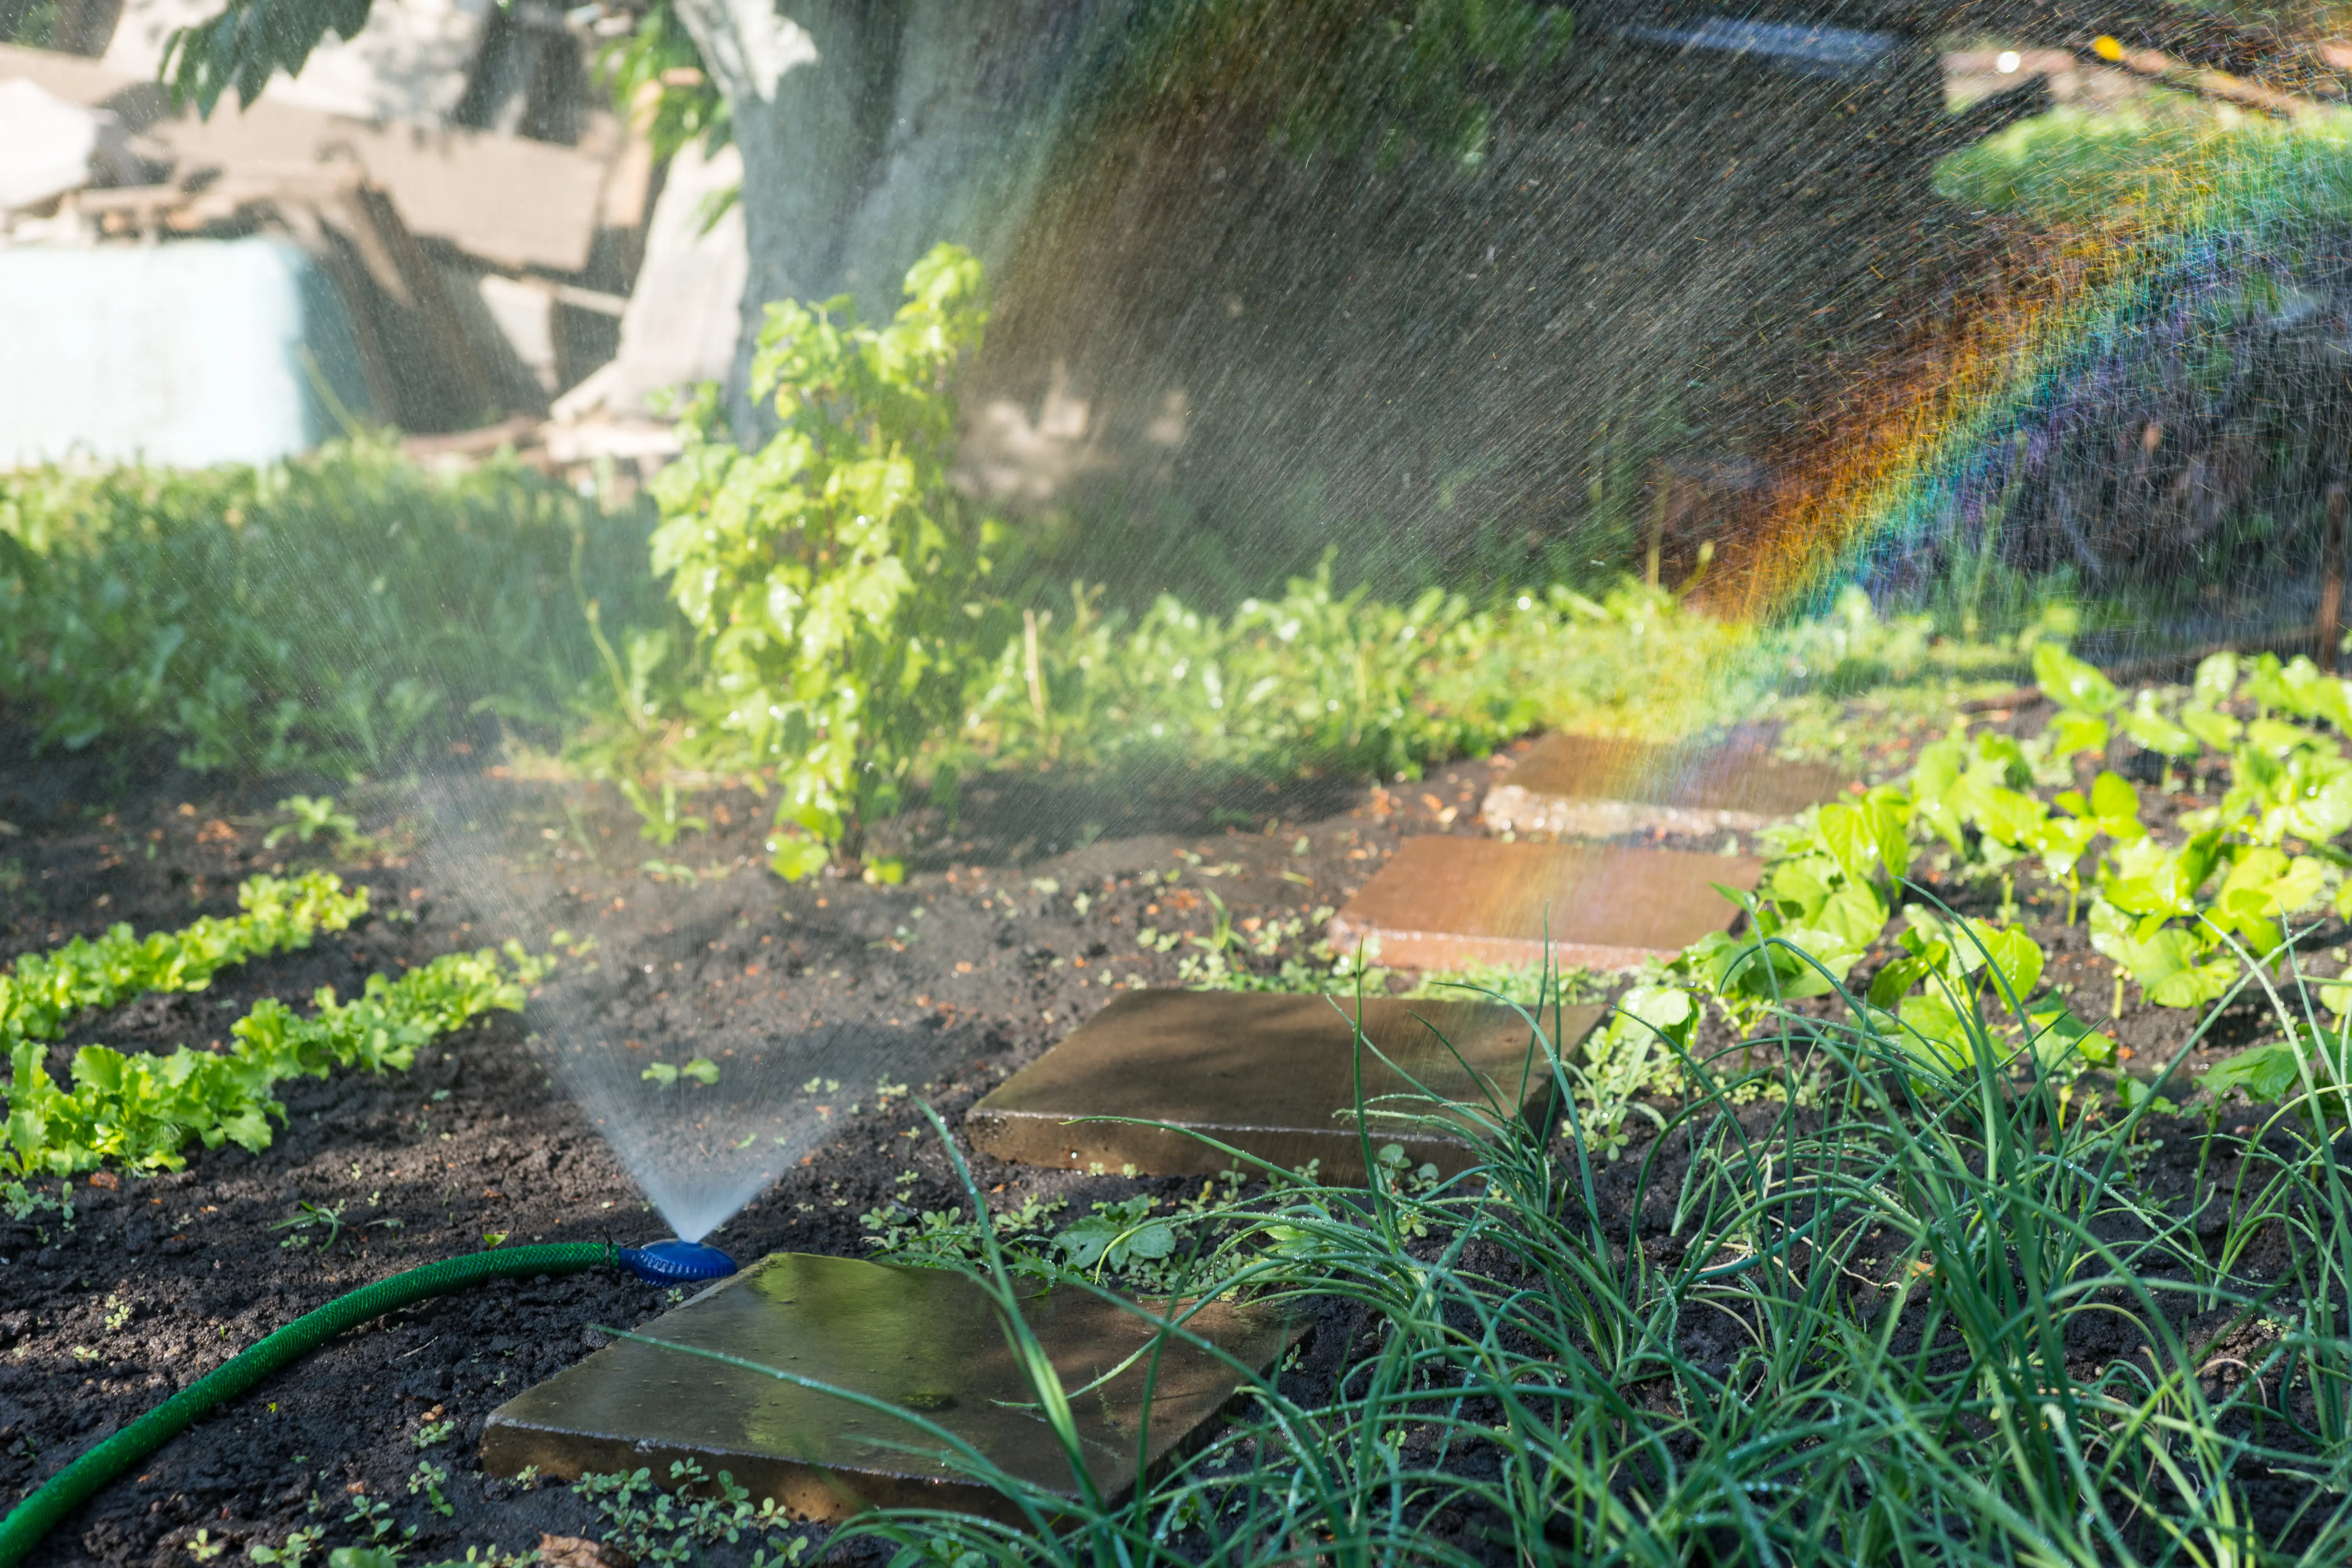 A sprinkler watering a veggie garden with a rainbow effect in the mist